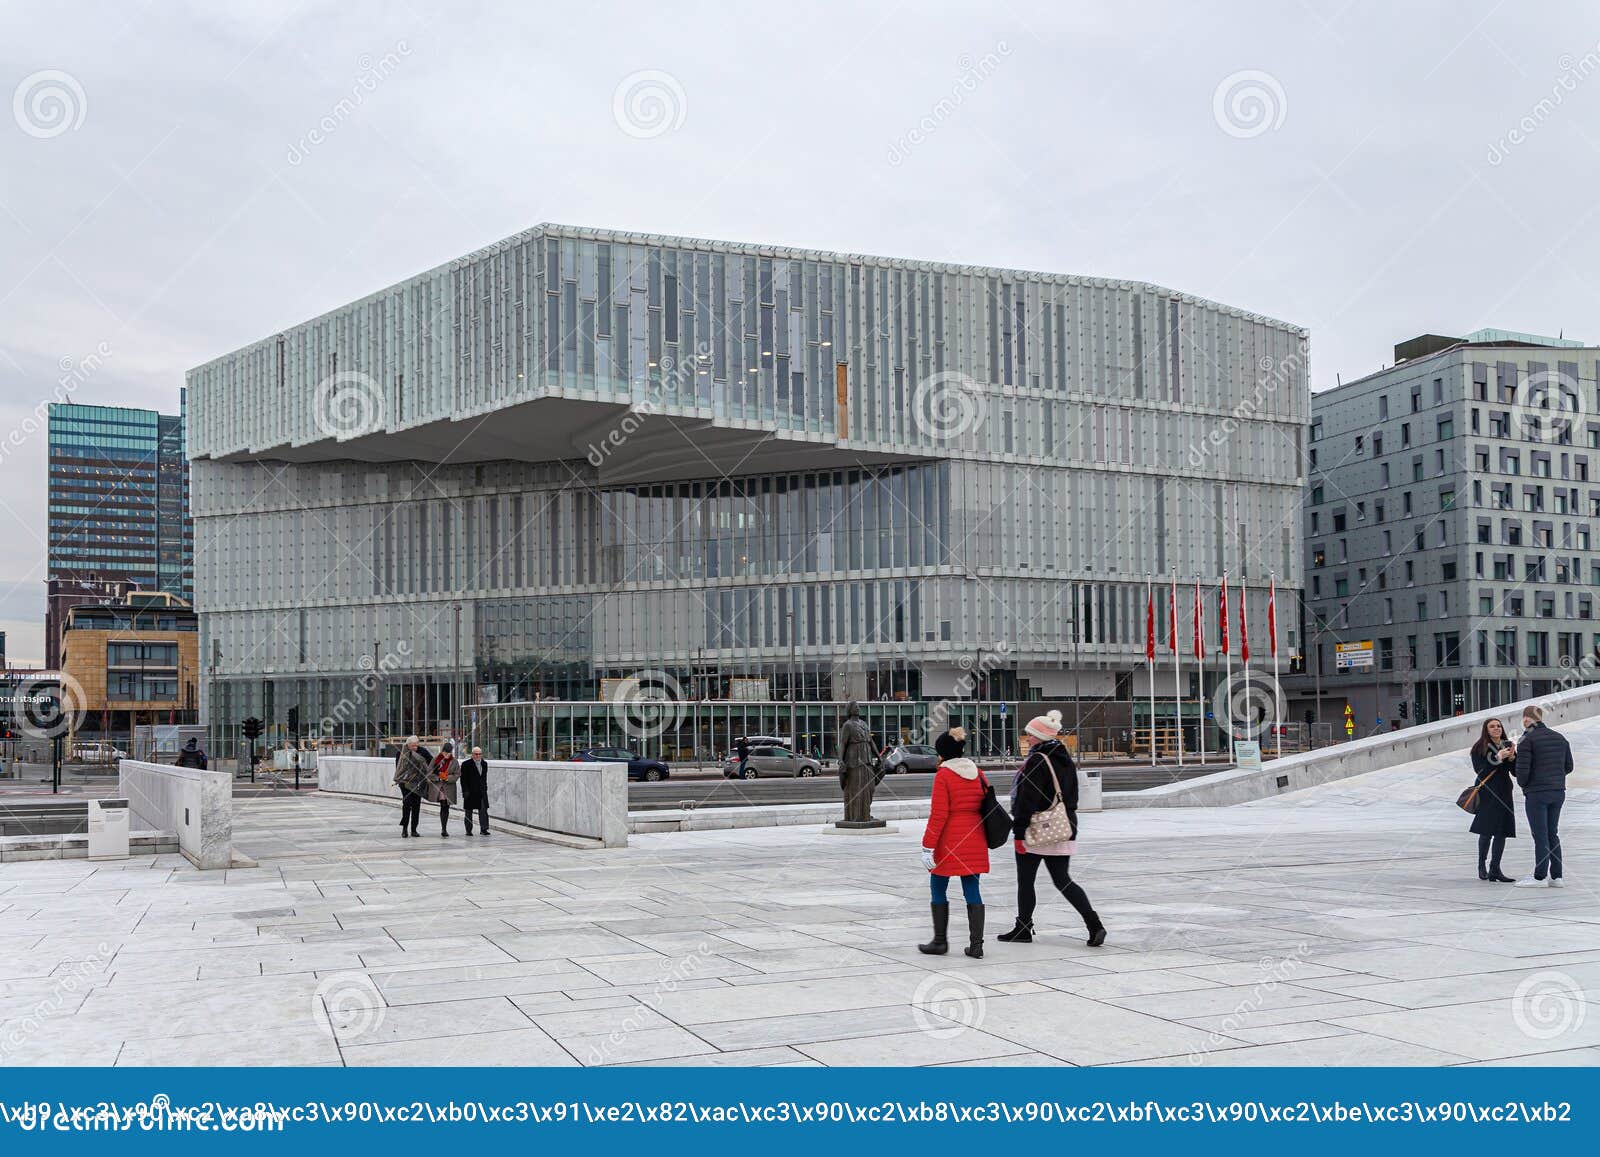 New Deichman Public Library in Oslo Editorial Photo - Image of collection: 167465146